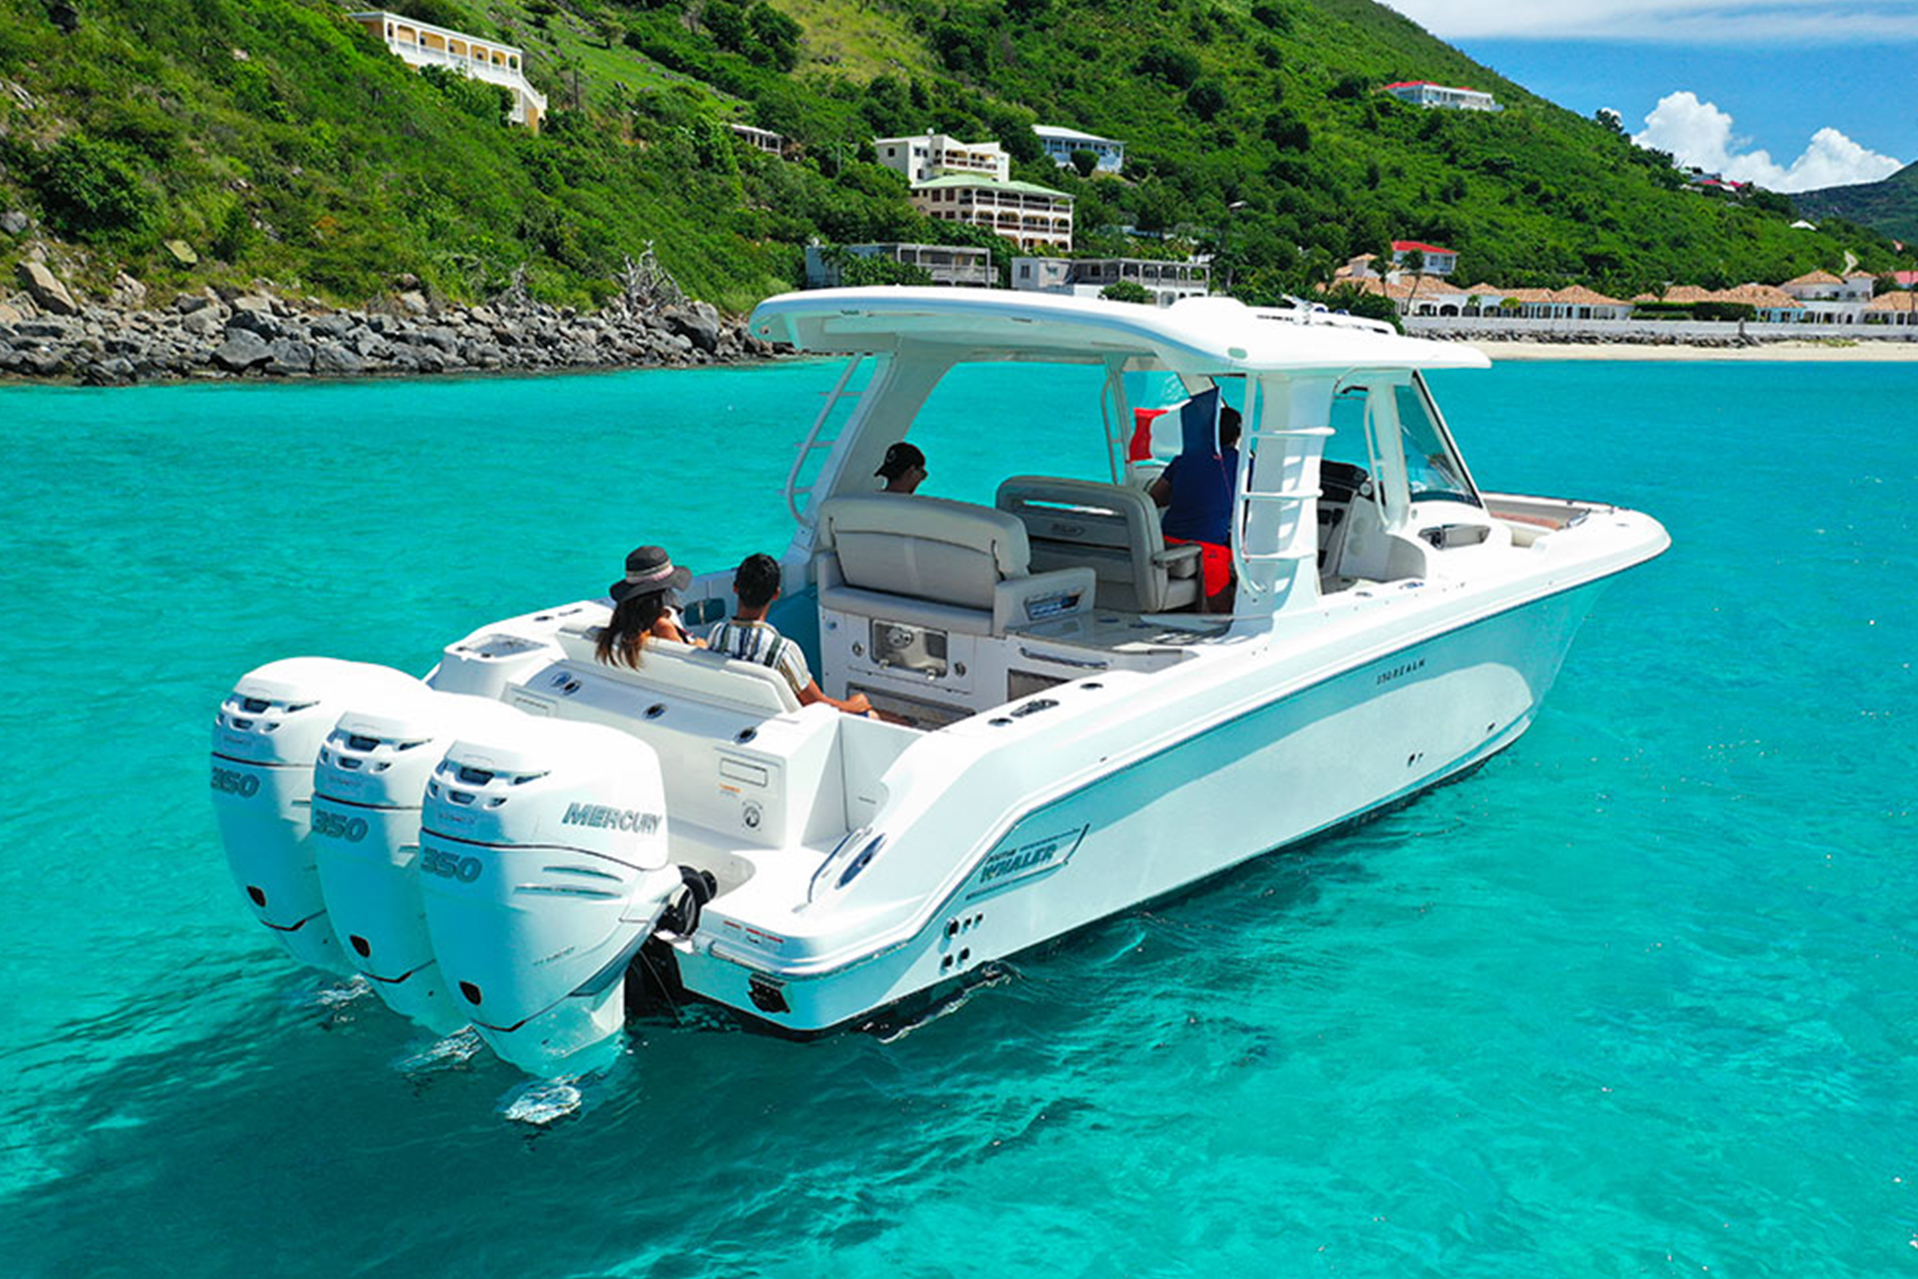 The Boston 35 is an elegantly designed yacht, with clean lines.